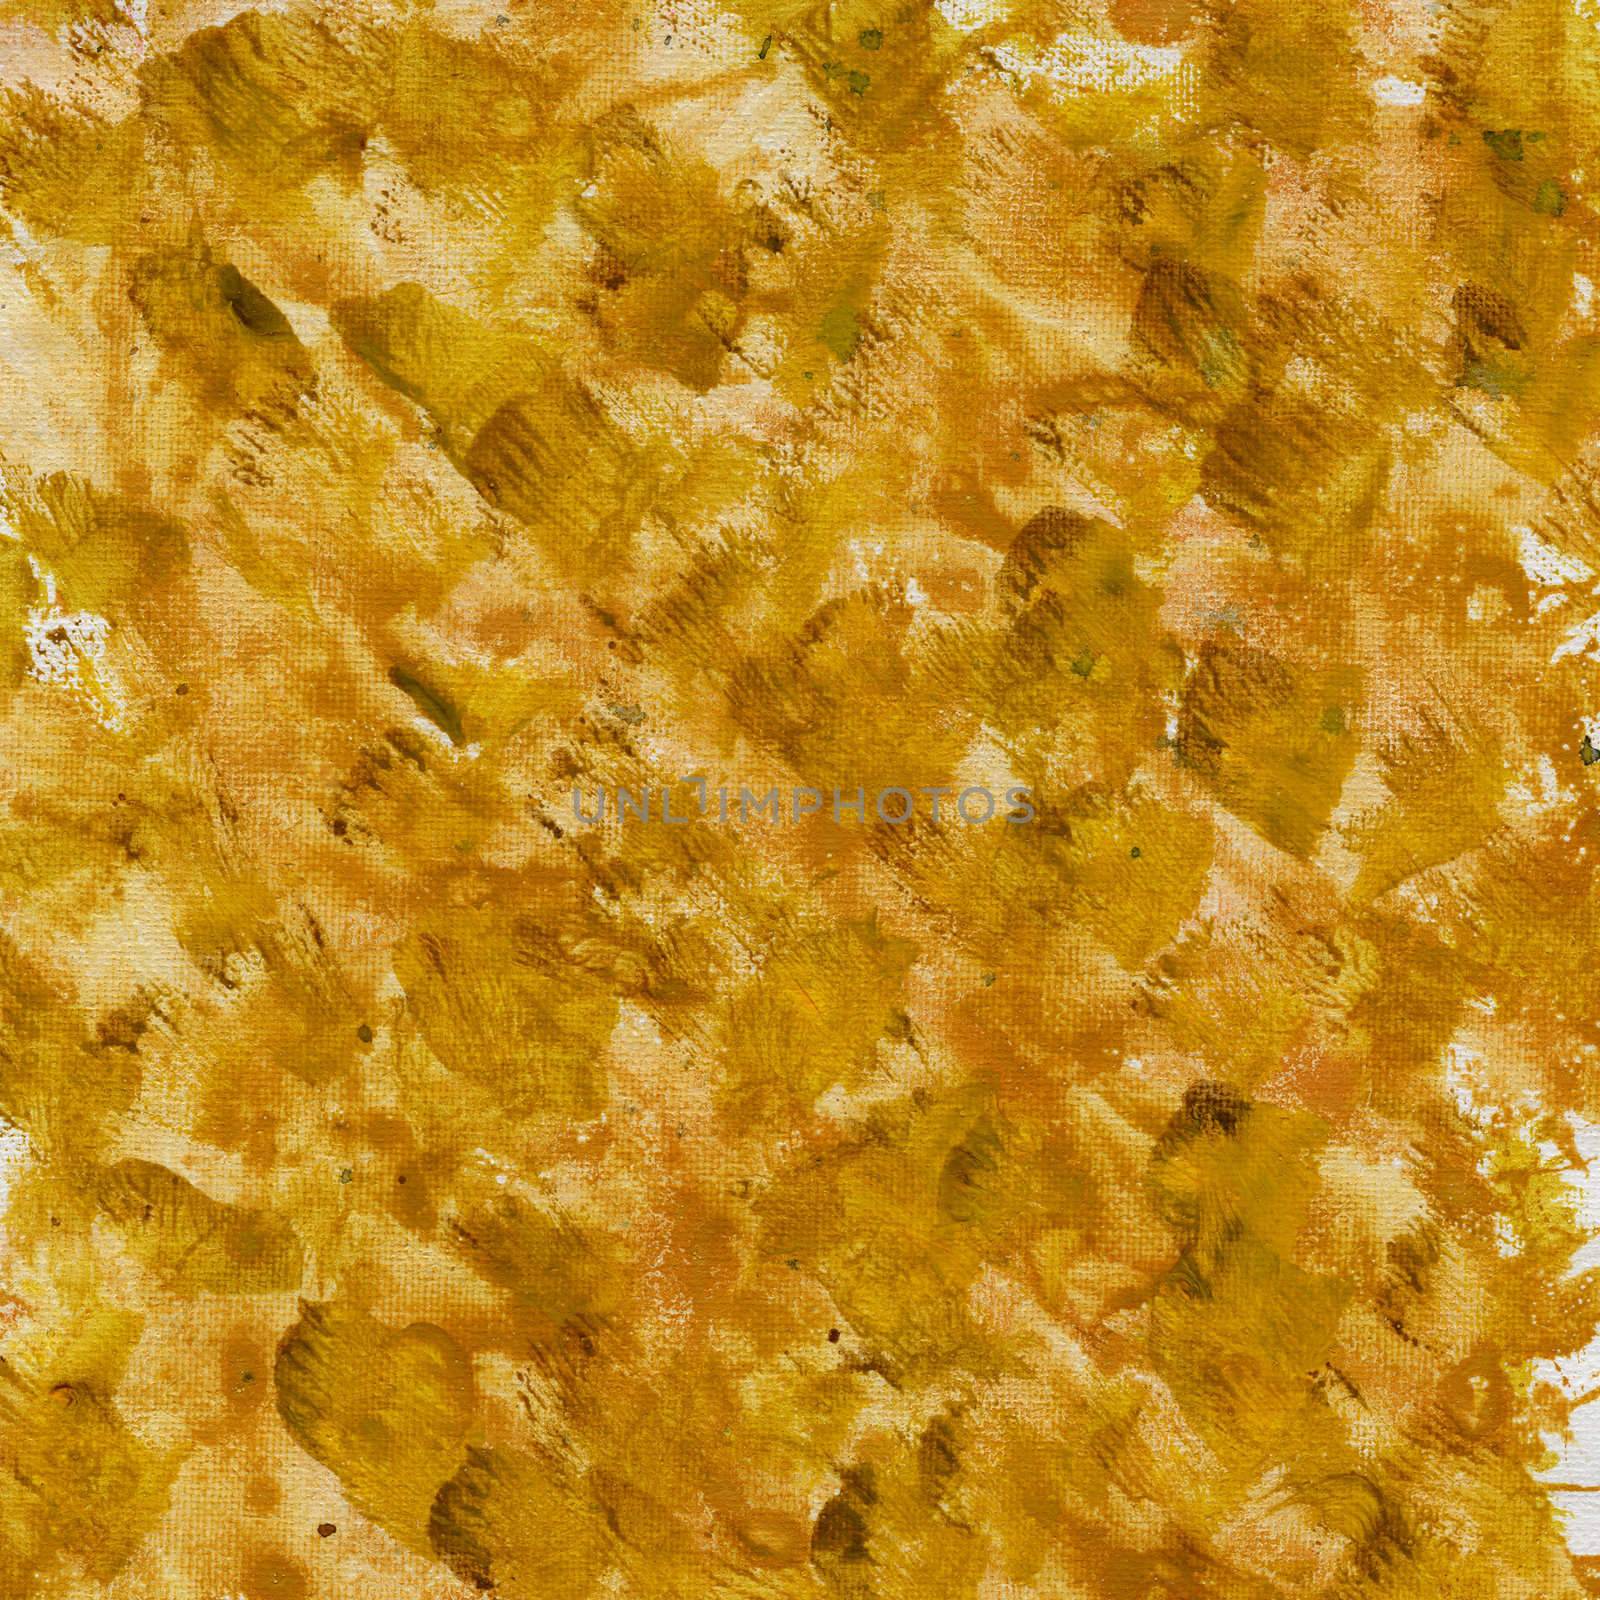 abstract background - splashes of yellow and brown watercolor paint on white artist canvas